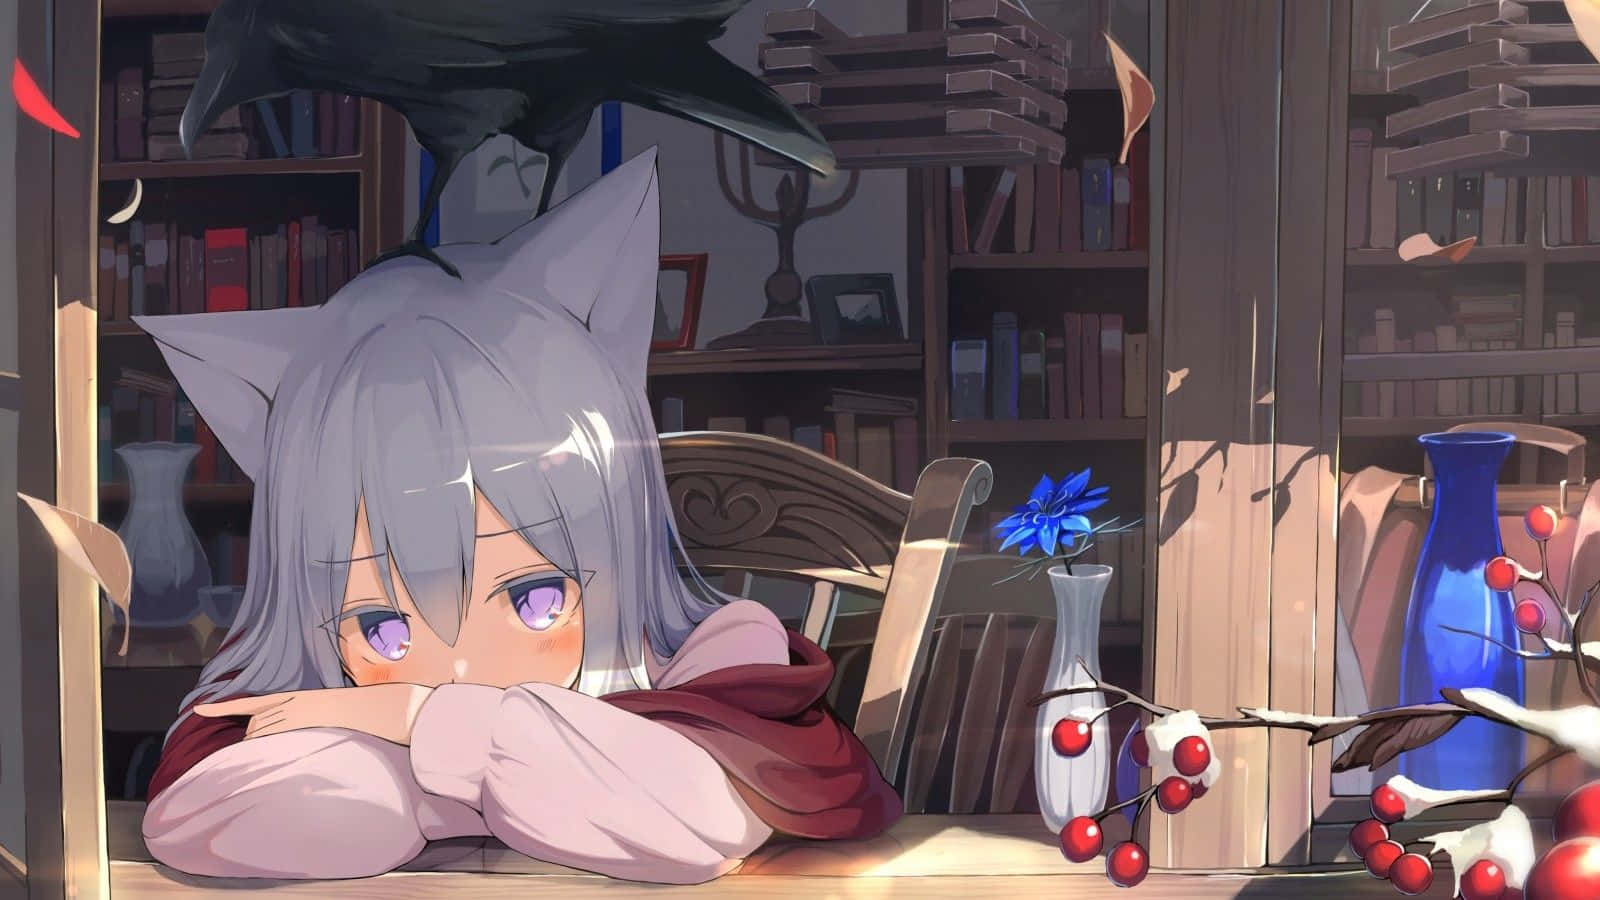 Sitting back and relaxing with cozy anime Wallpaper